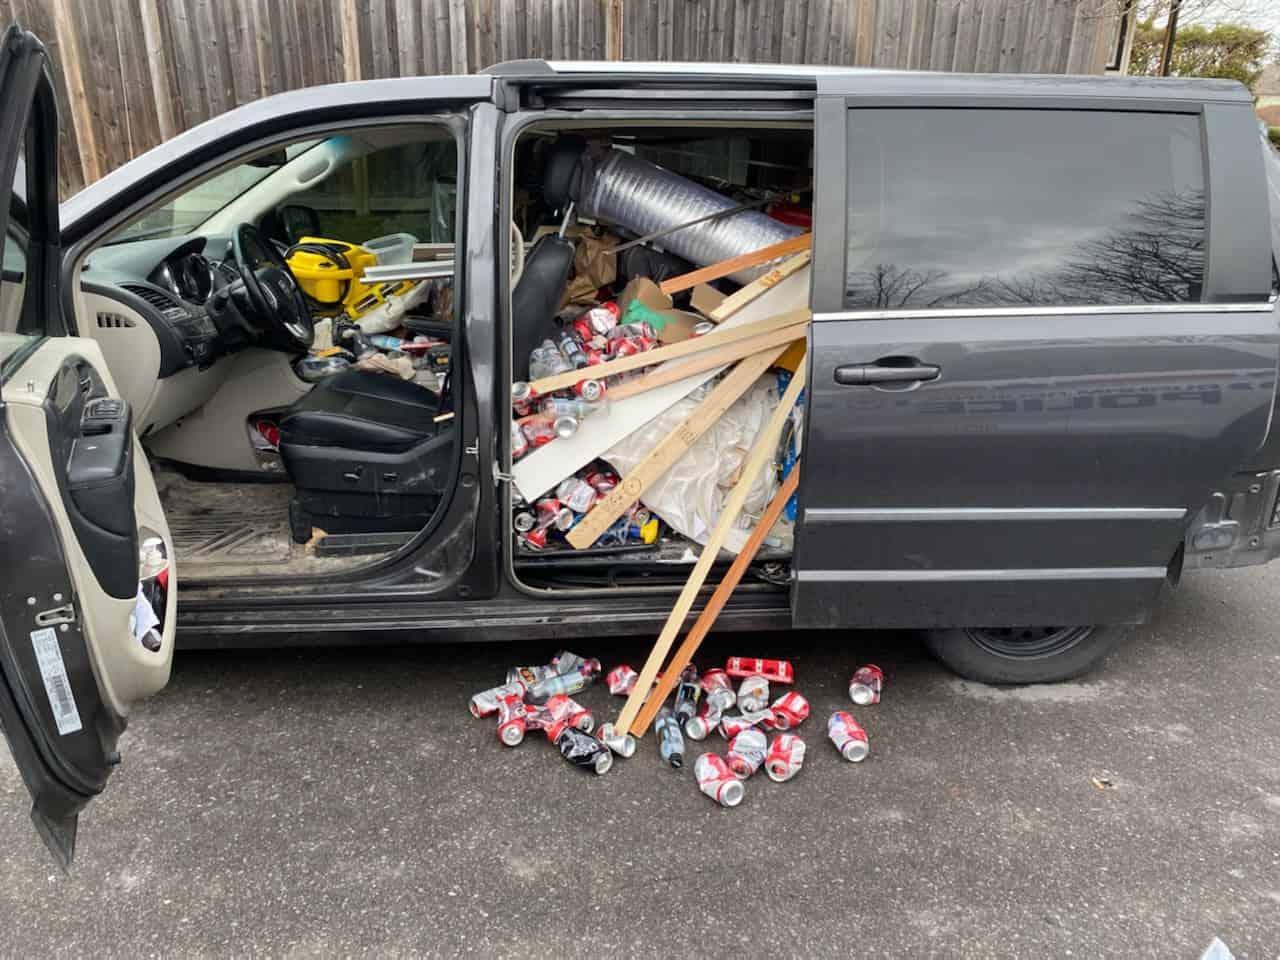 Drunk driver stopped at three times the legal limit with a backseat full of empties near Clarington school